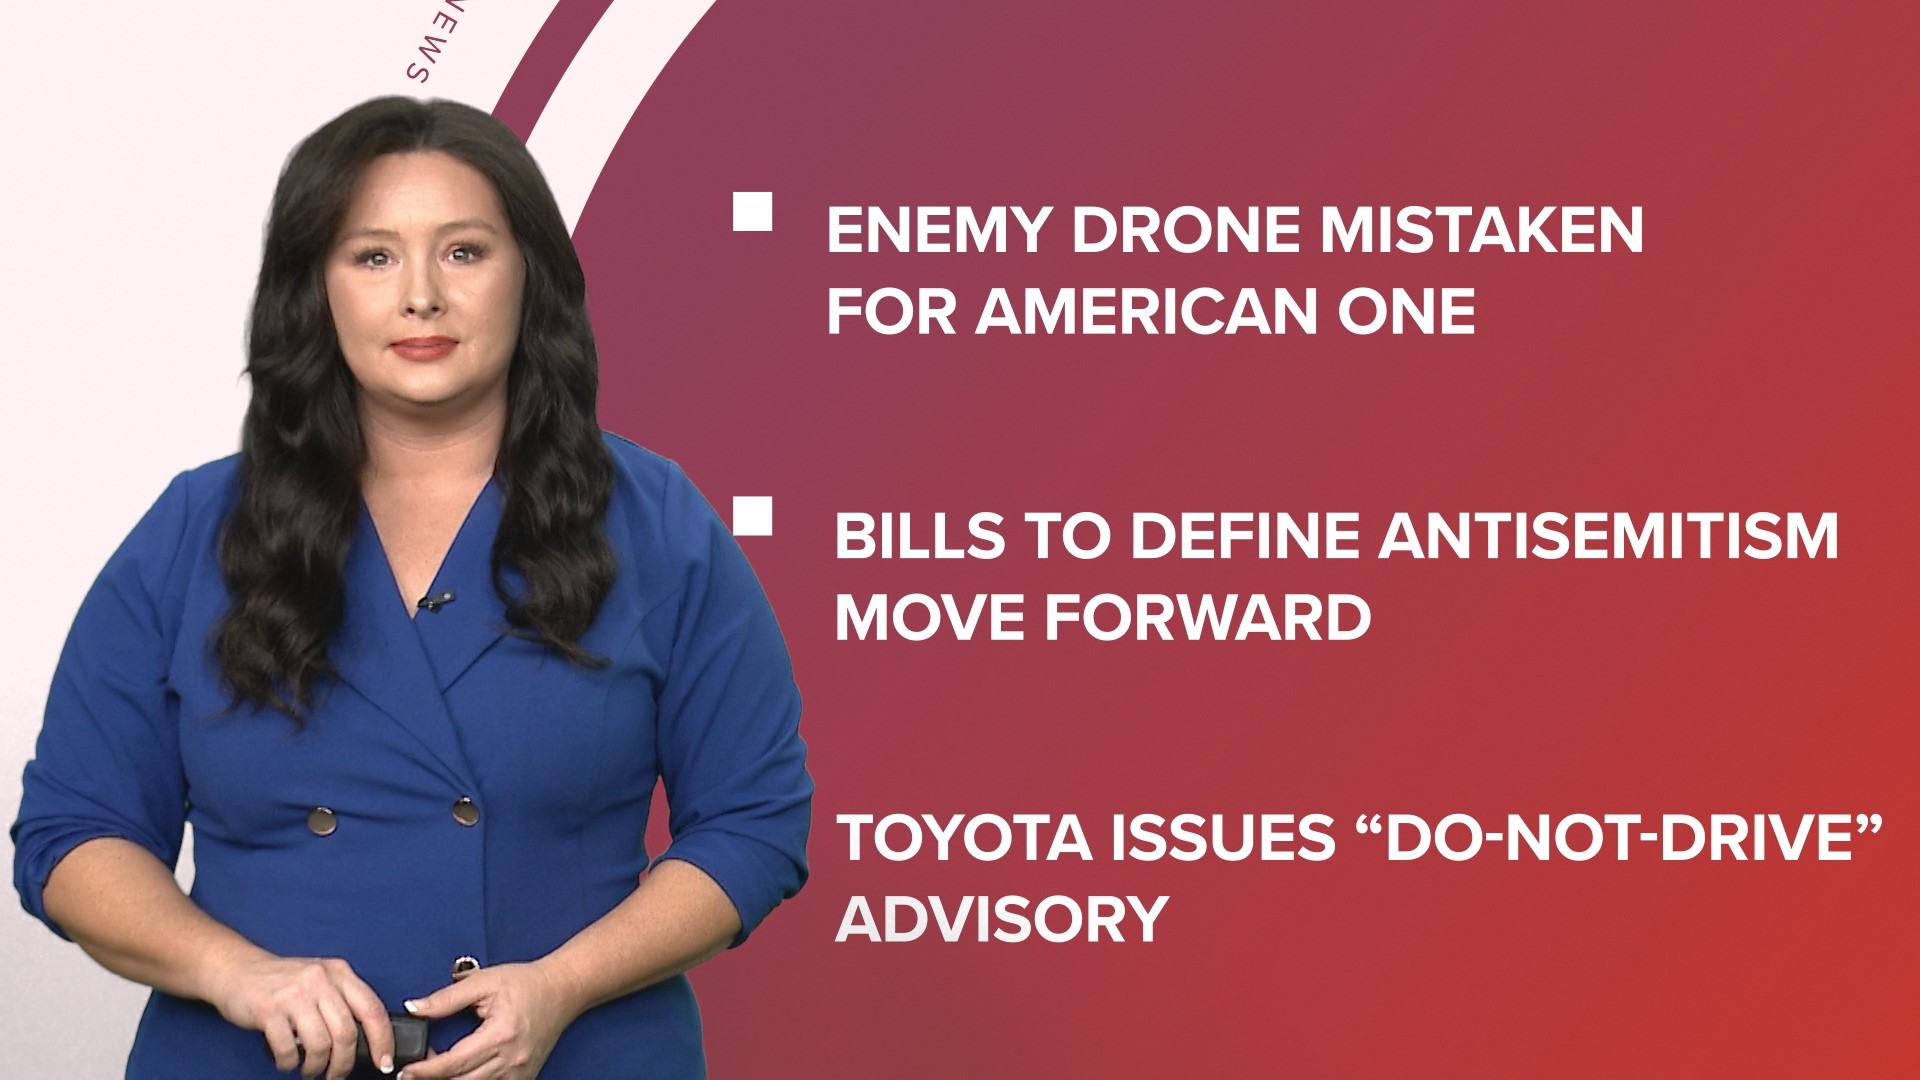 A look at what is happening in the news from an update on the drone attack in Jordan to mandatory neck guards for youth hockey and an antisemitism bill in Georgia.